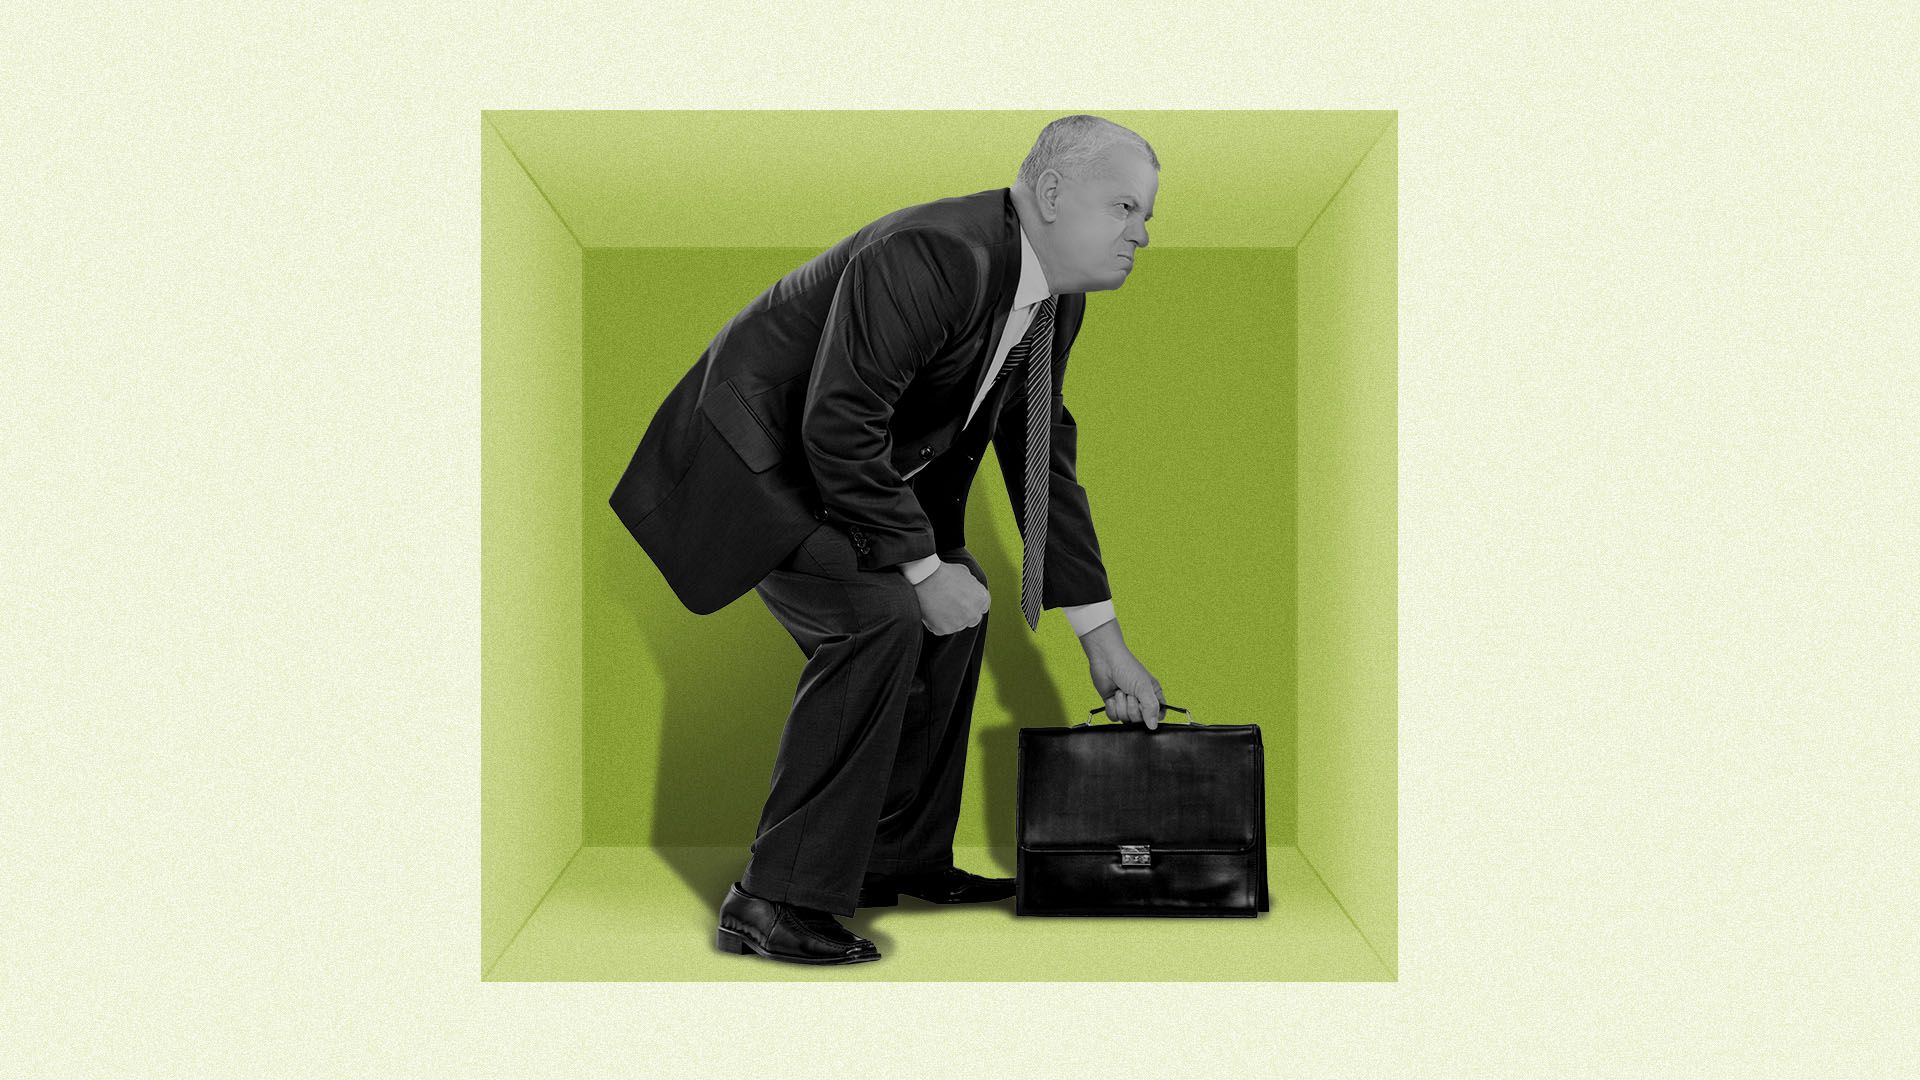 Illustration of a man in a business suit crouching in a confined space